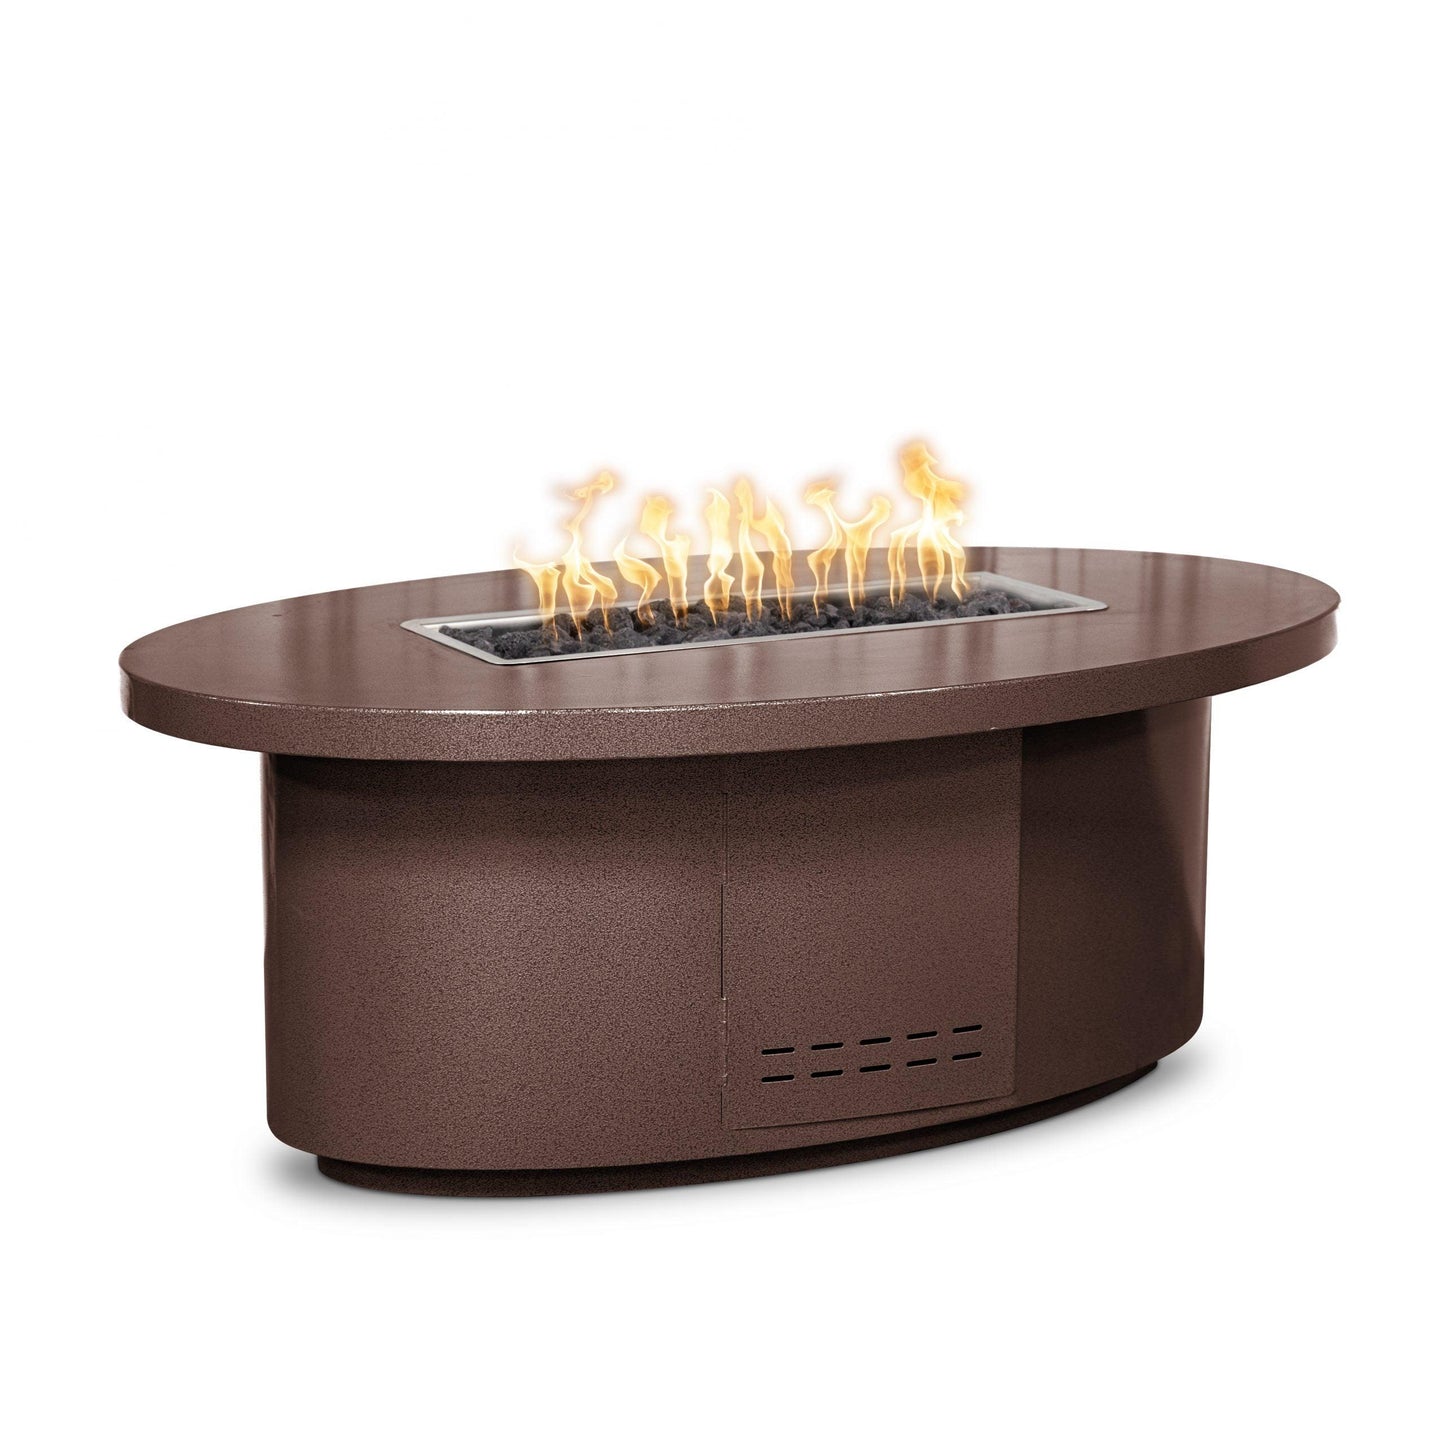 Vallejo Fire Pit Copper Vein scaled